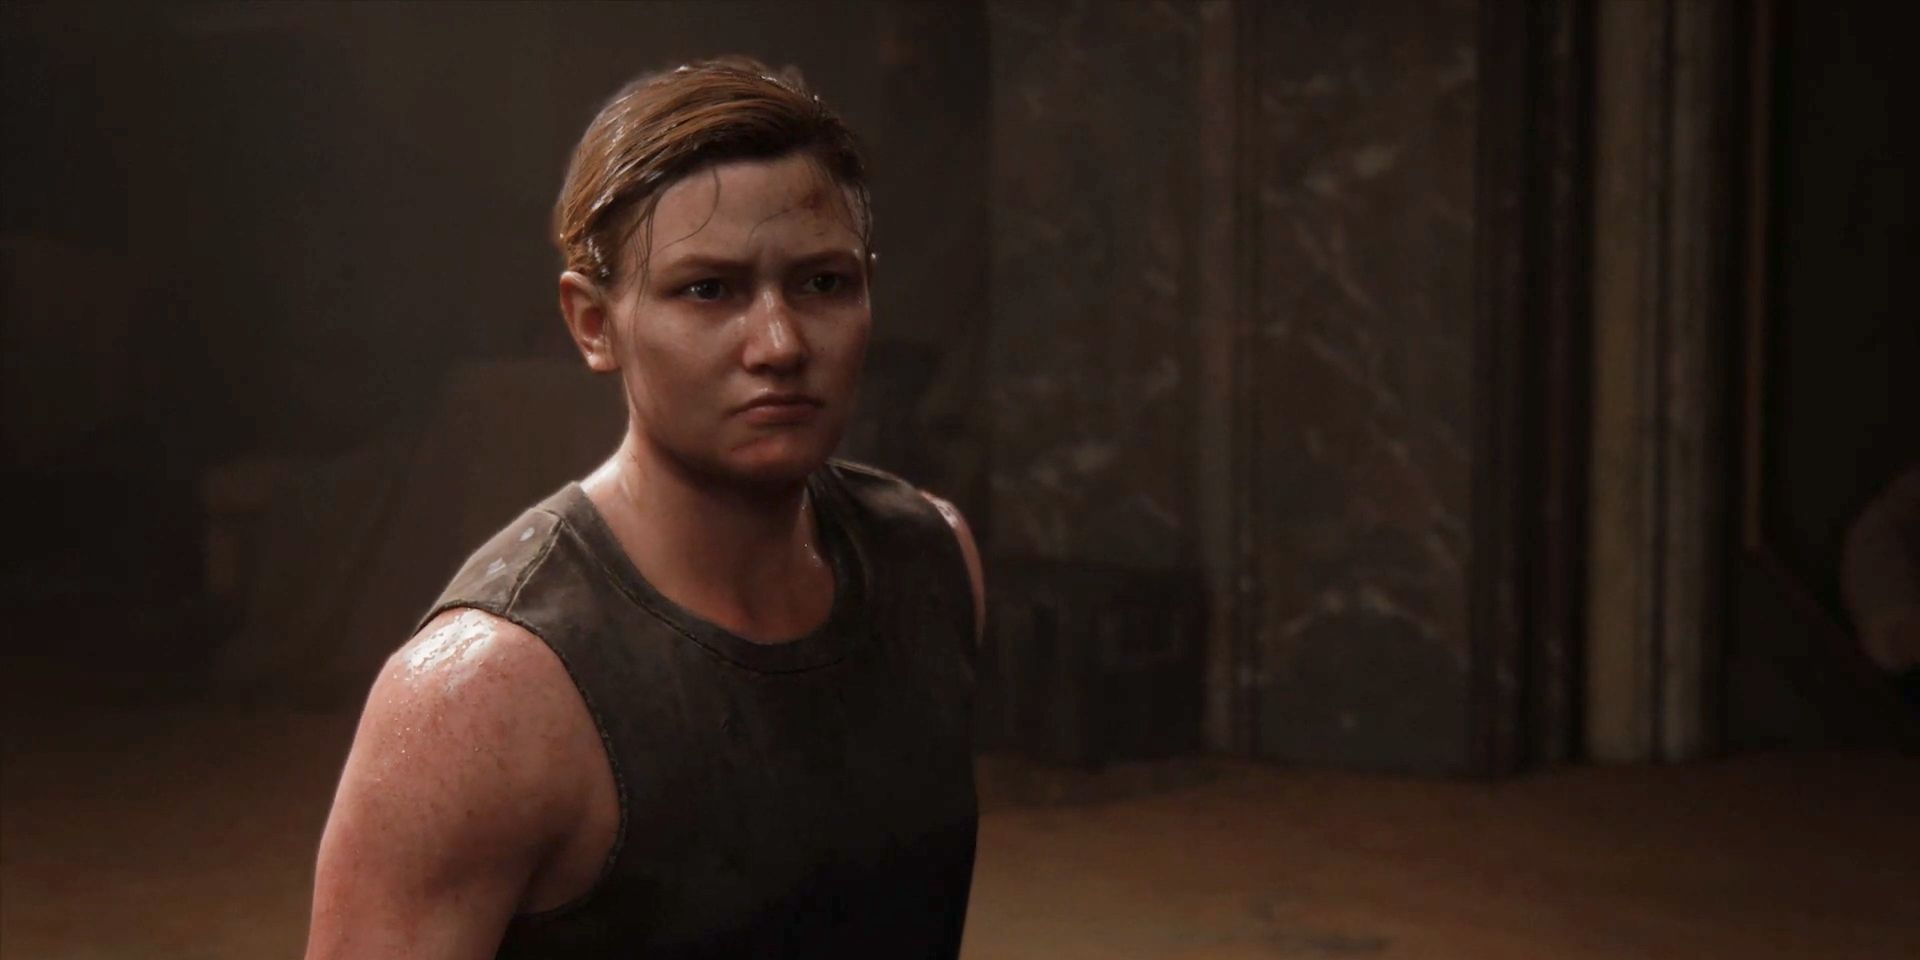 Last of Us Part 2: Who Plays Abby - Voice, Face, & Body Models